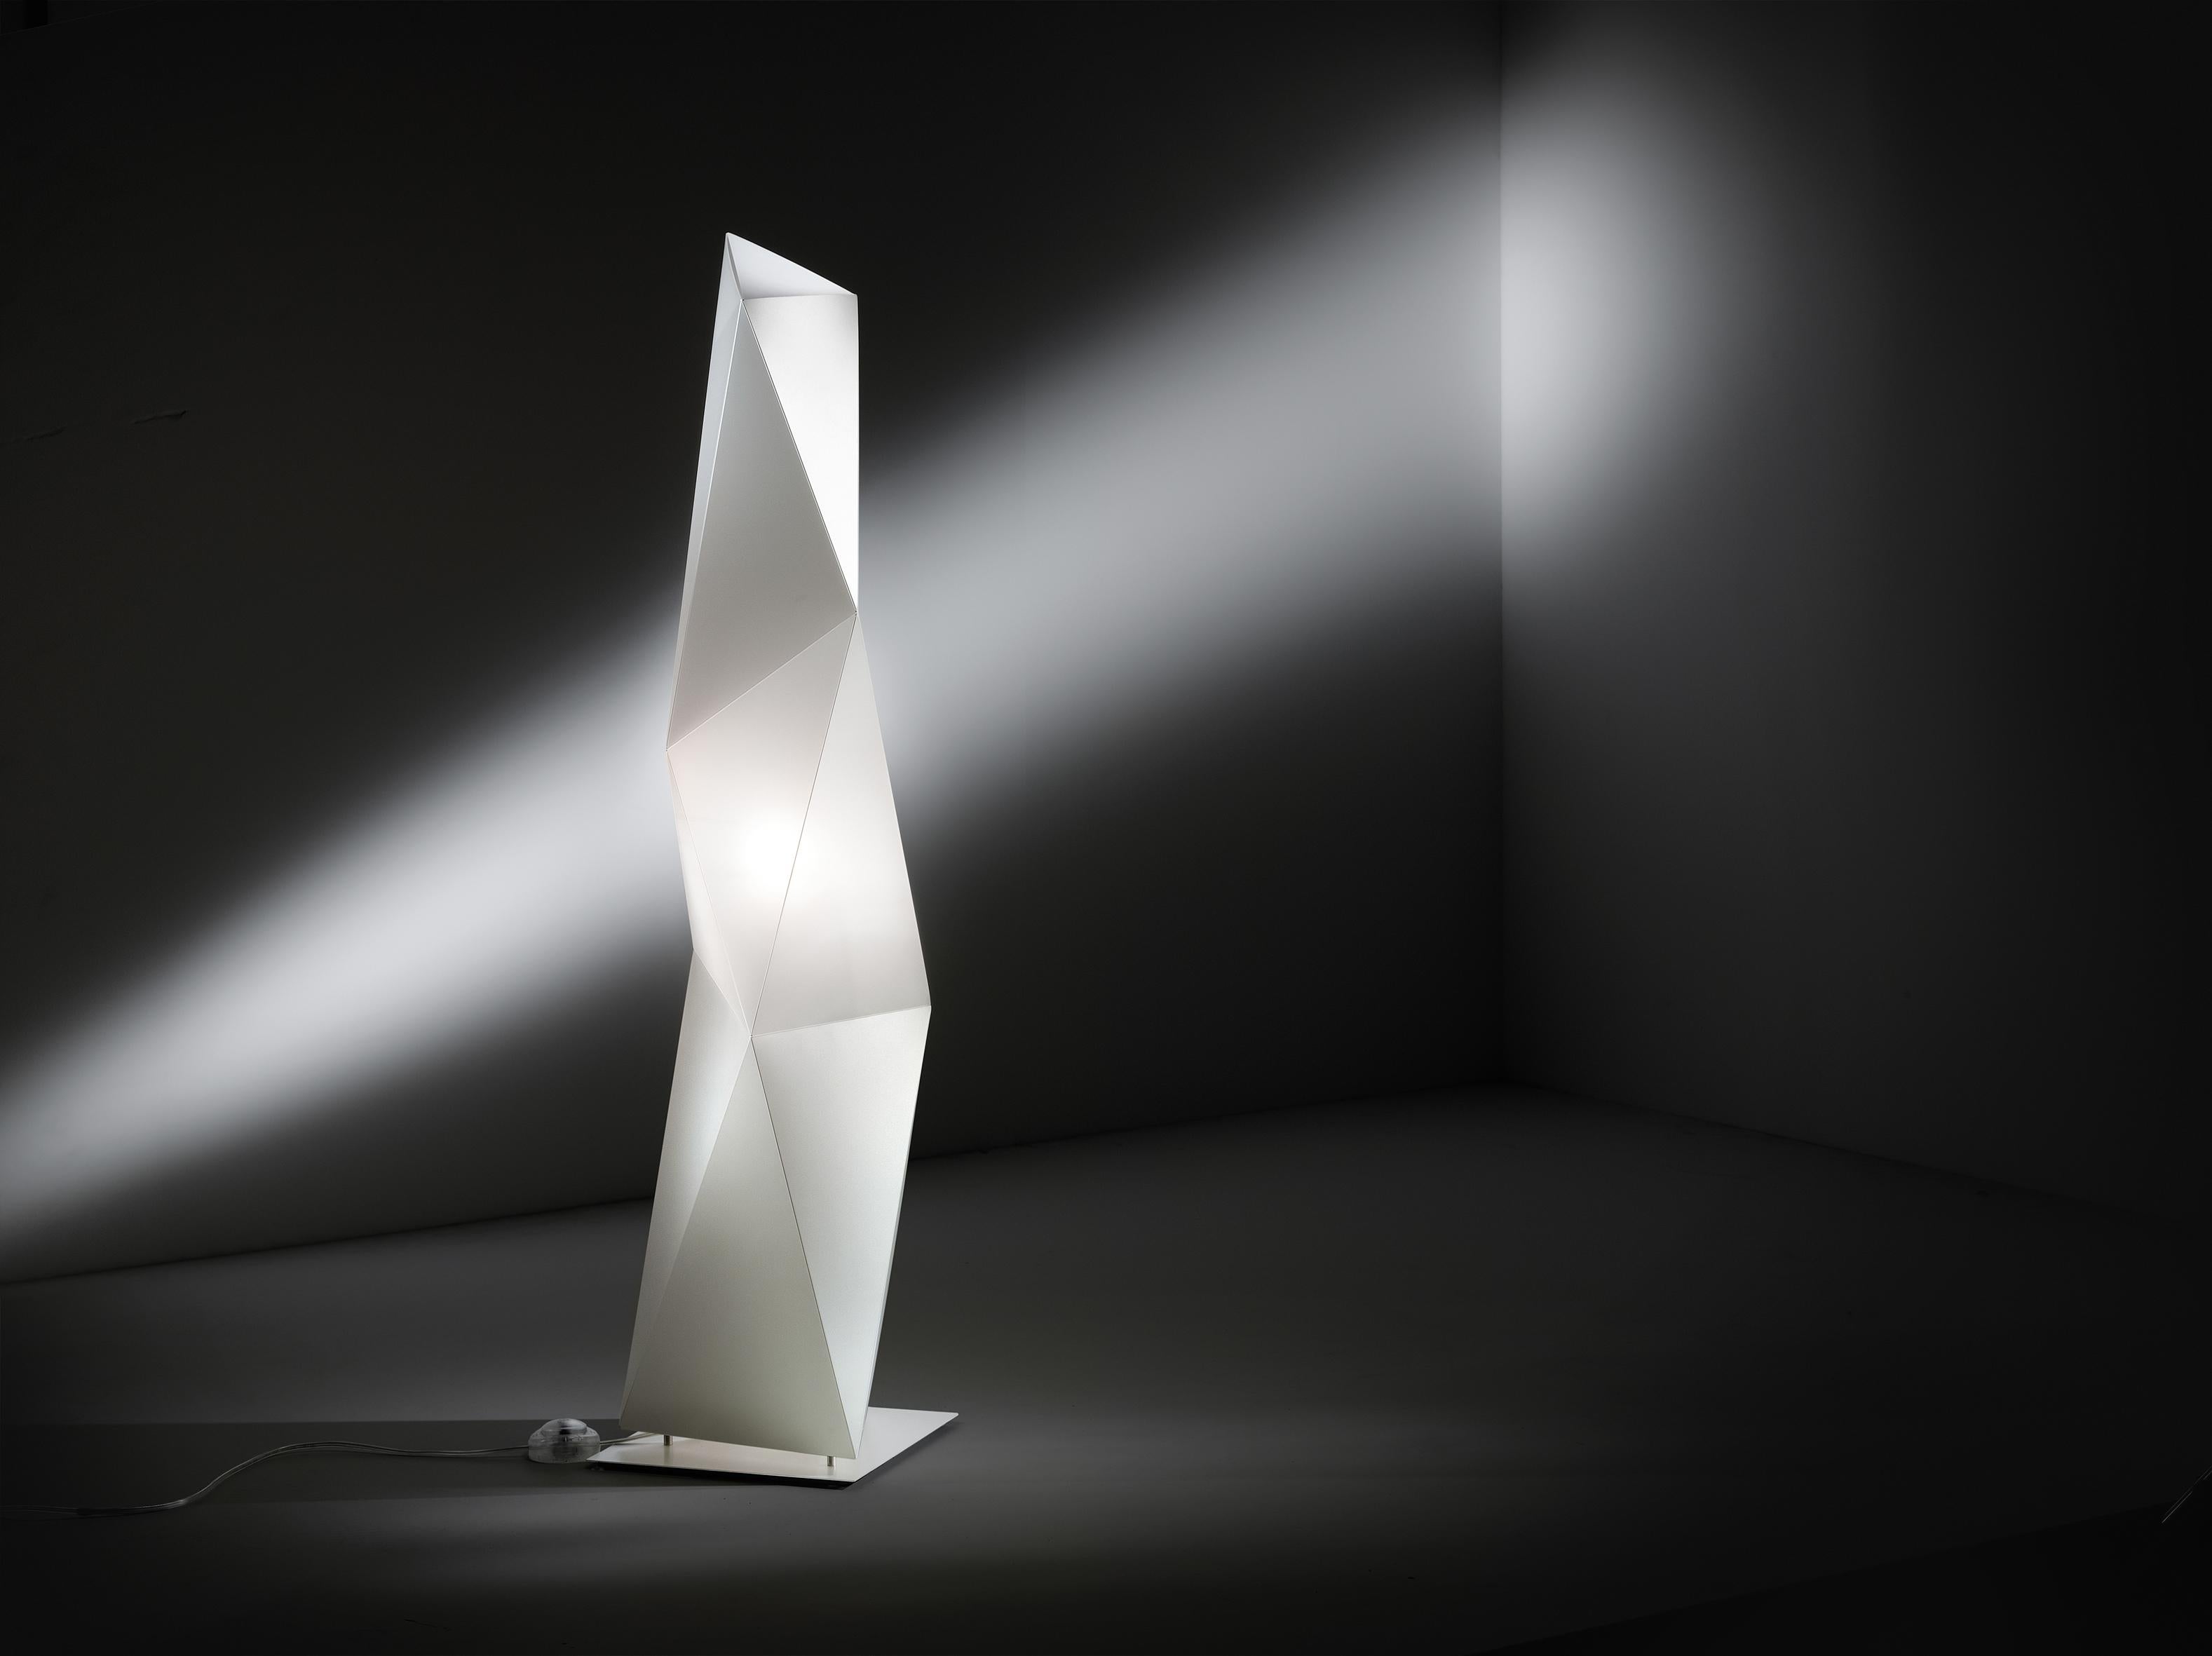 Sculptural, dynamic, and modern, inspired by the iconic works of Brancusi. Diamond’s geometric design allows the light to accentuate its various facets and angles. The luminous sculpture is available in three dimensions, each fit for different